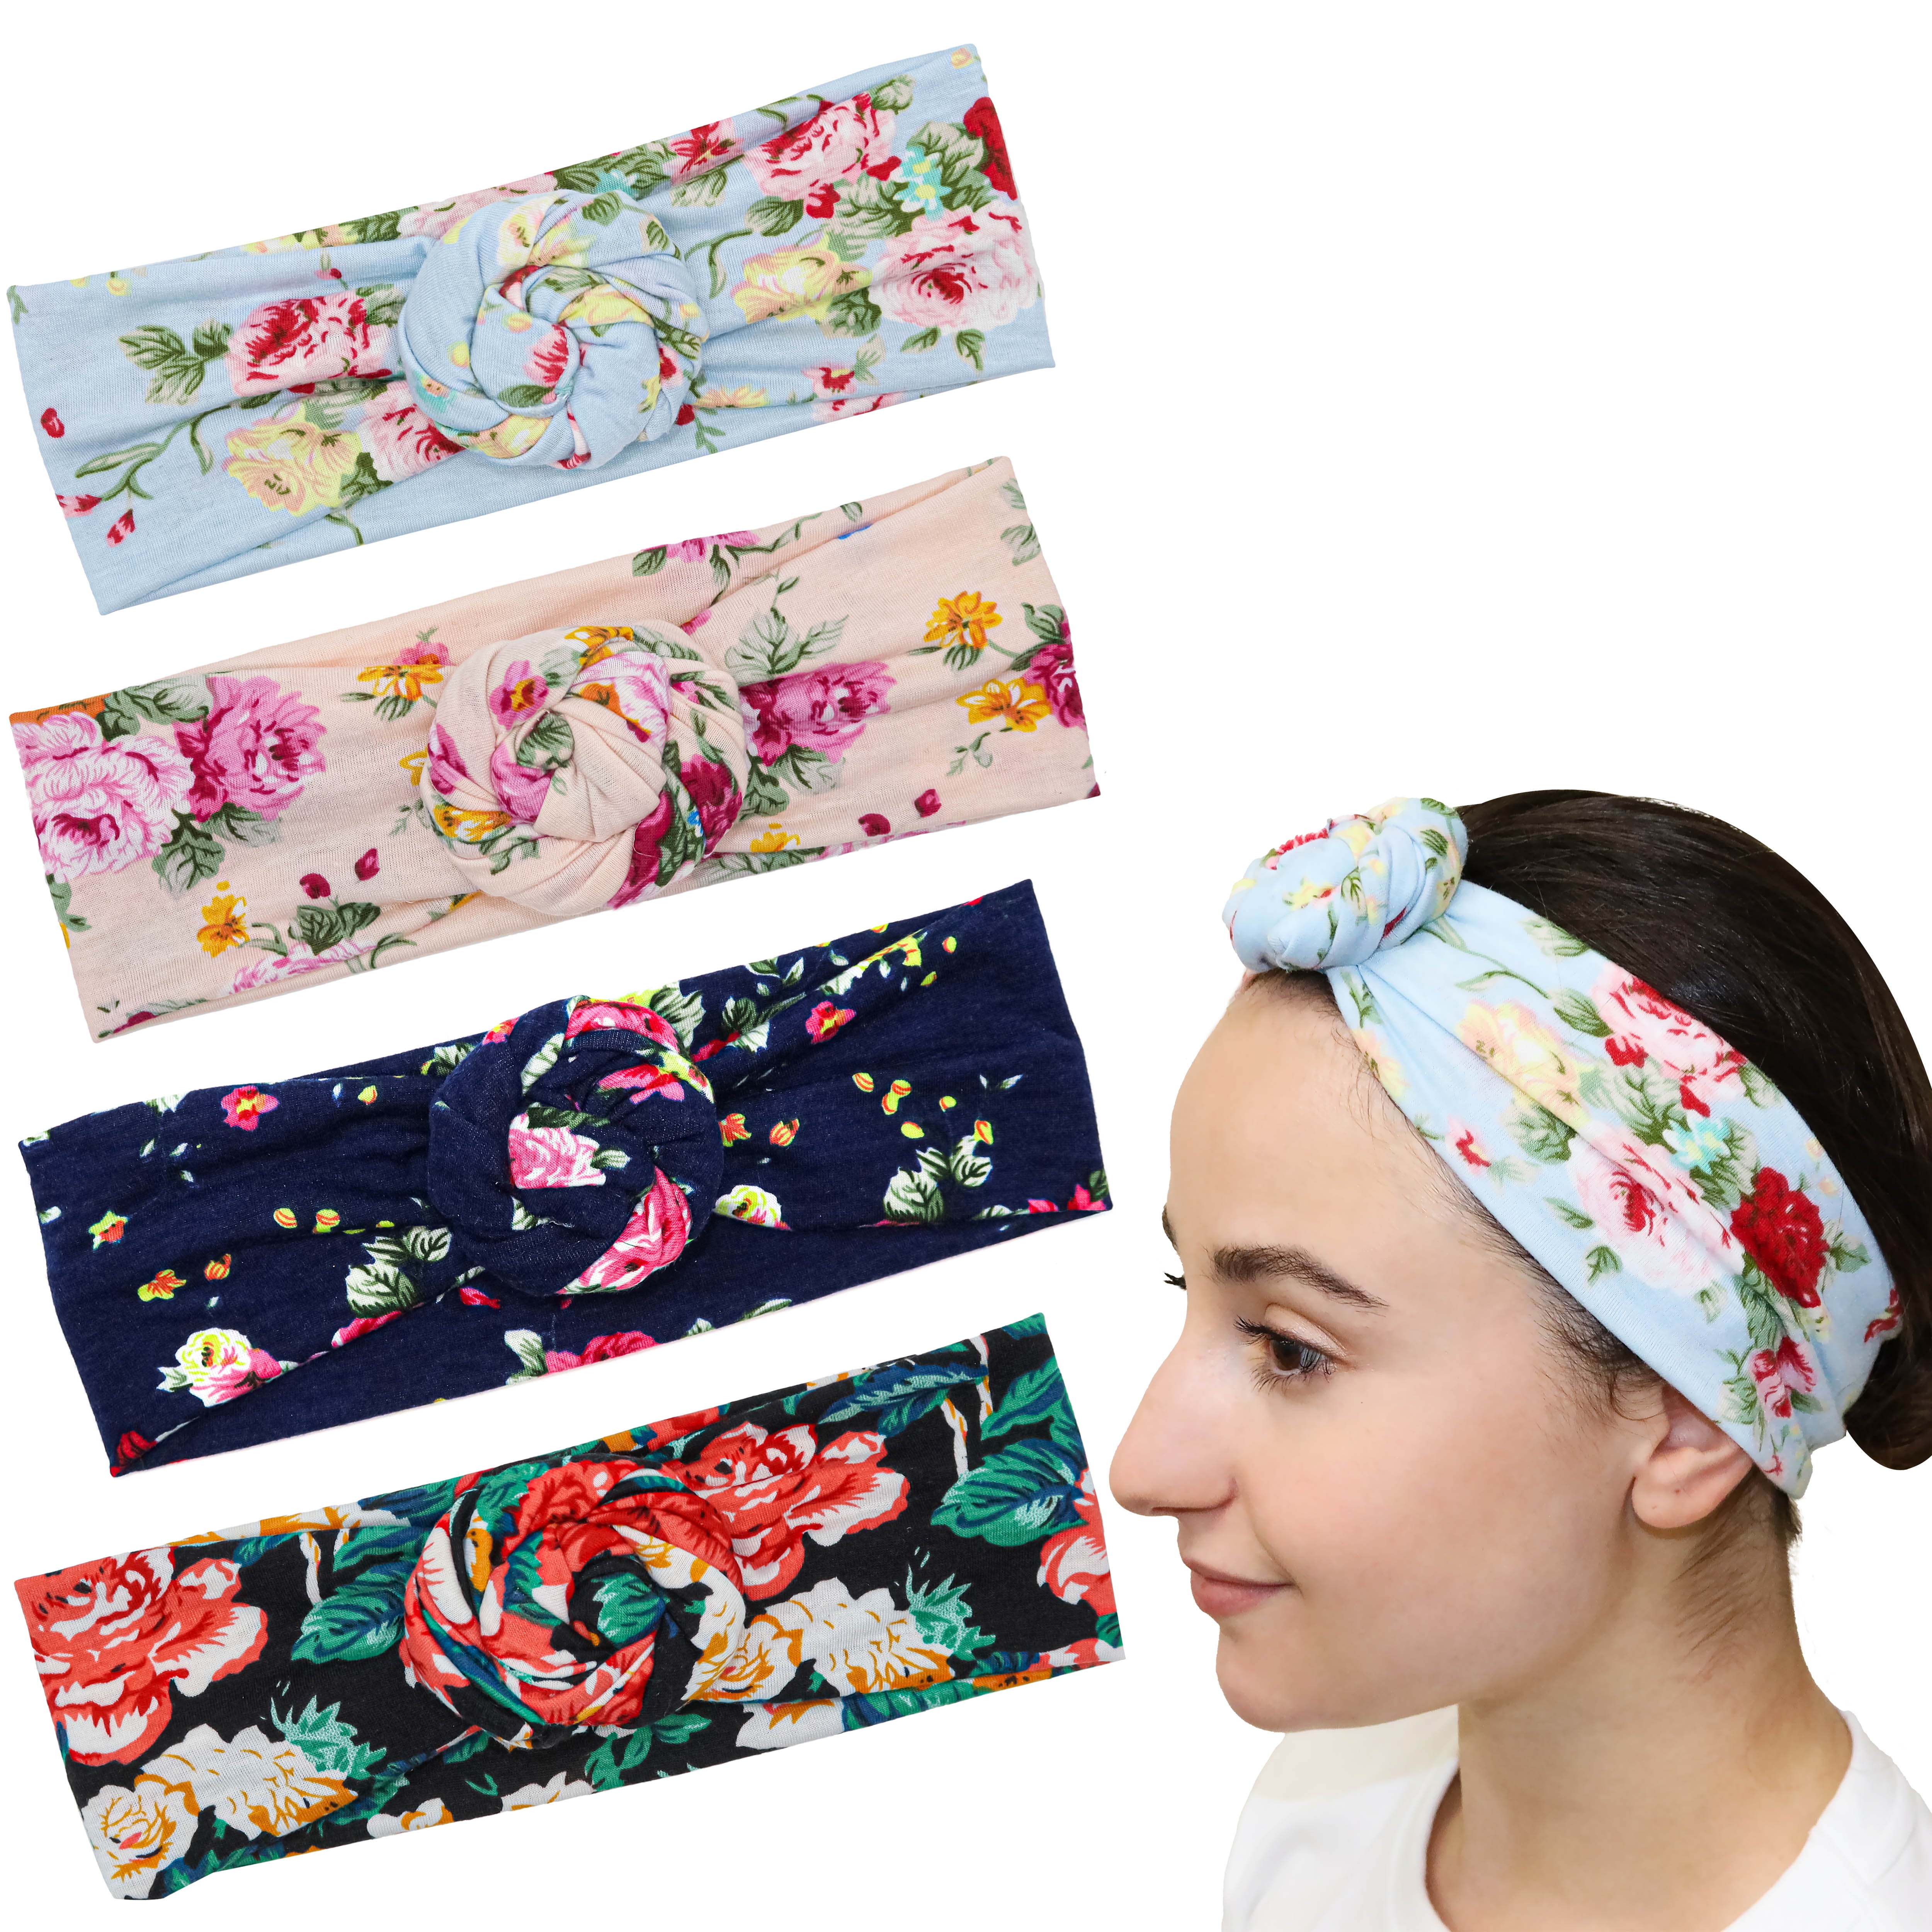 6 Pack Headbands for Women Turband Headwrap Yoga Gym Floral Glitter Multi-Style 